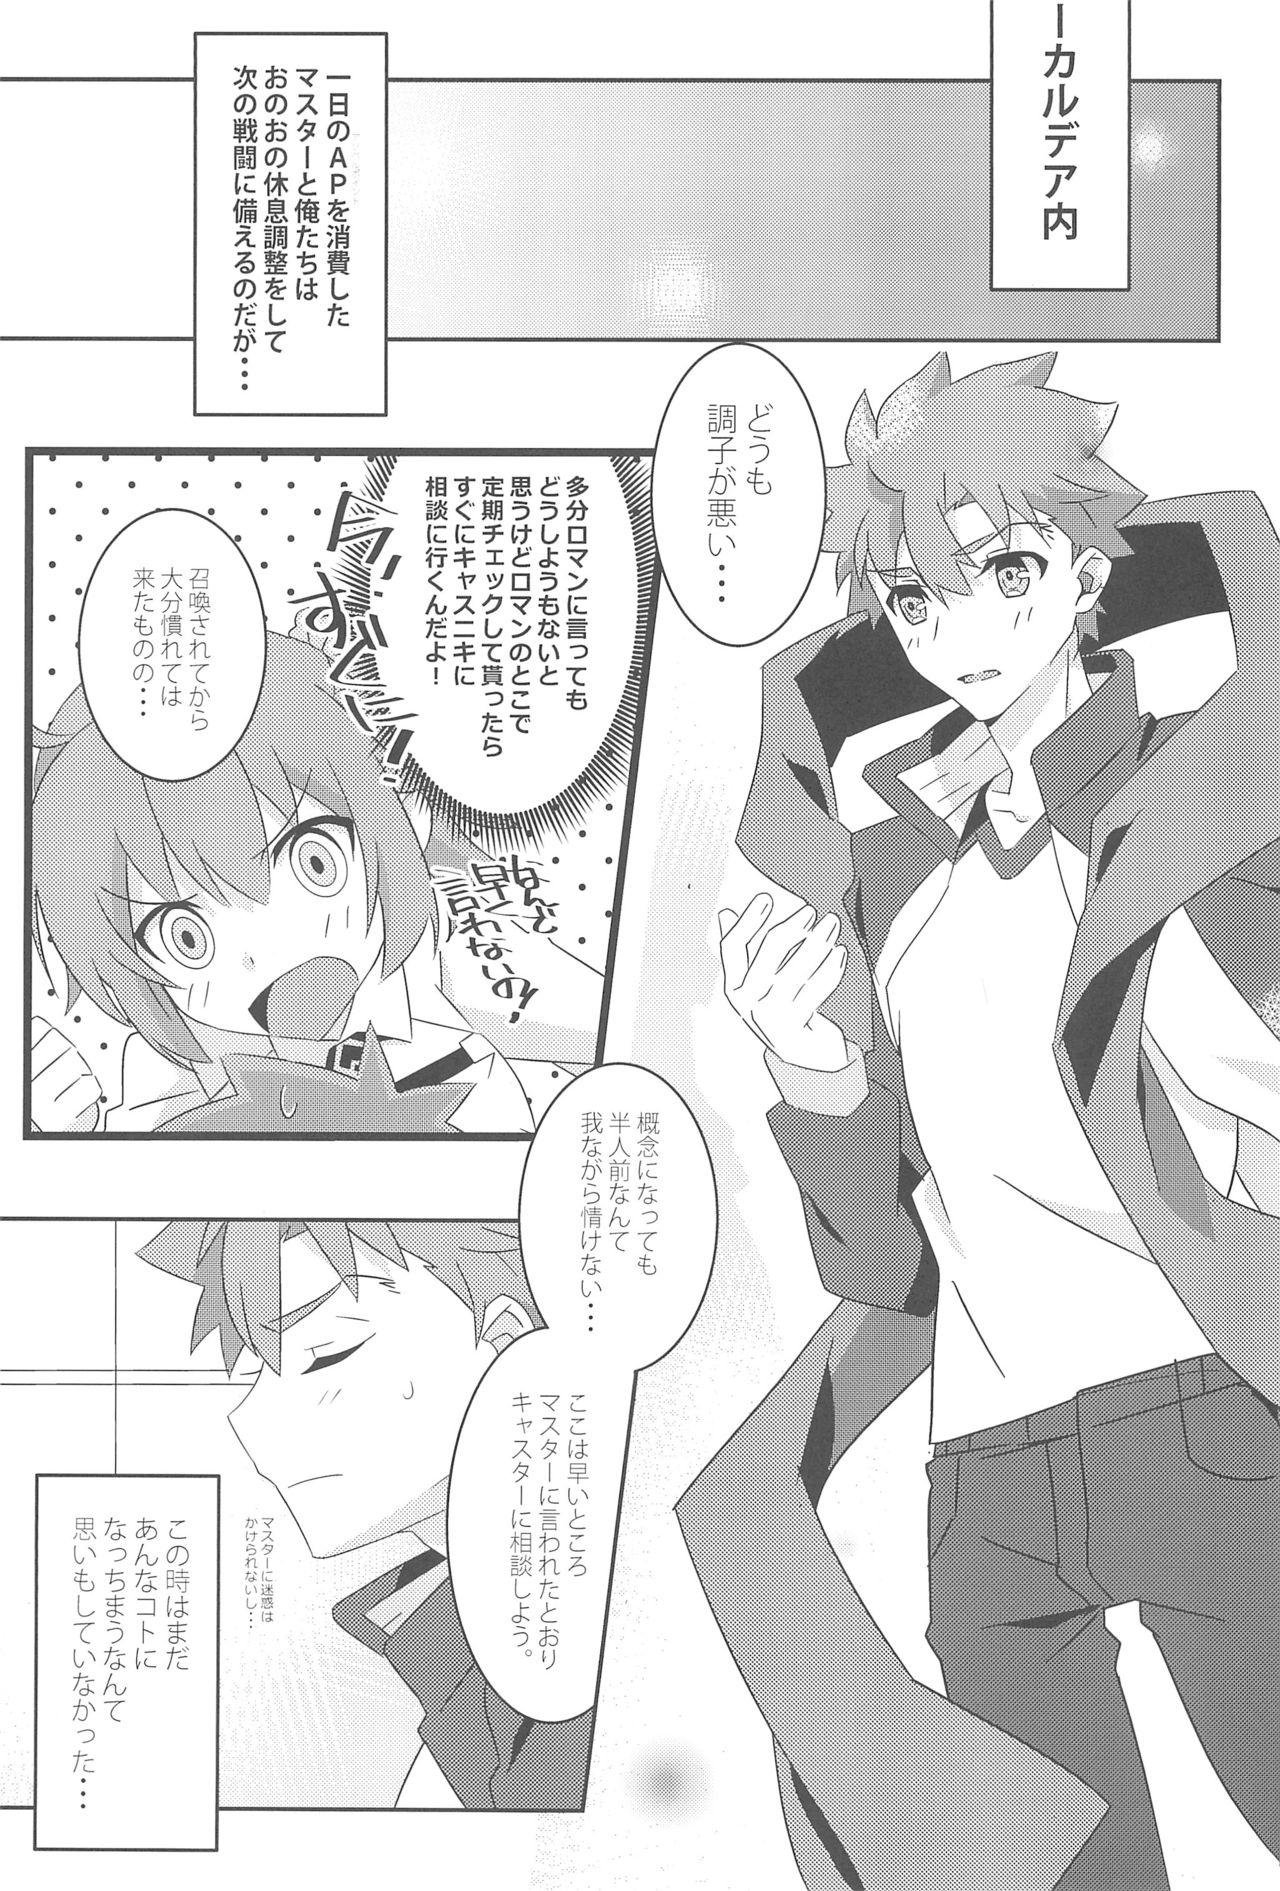 Girlfriends COME TO ME - Fate stay night Flashing - Page 5